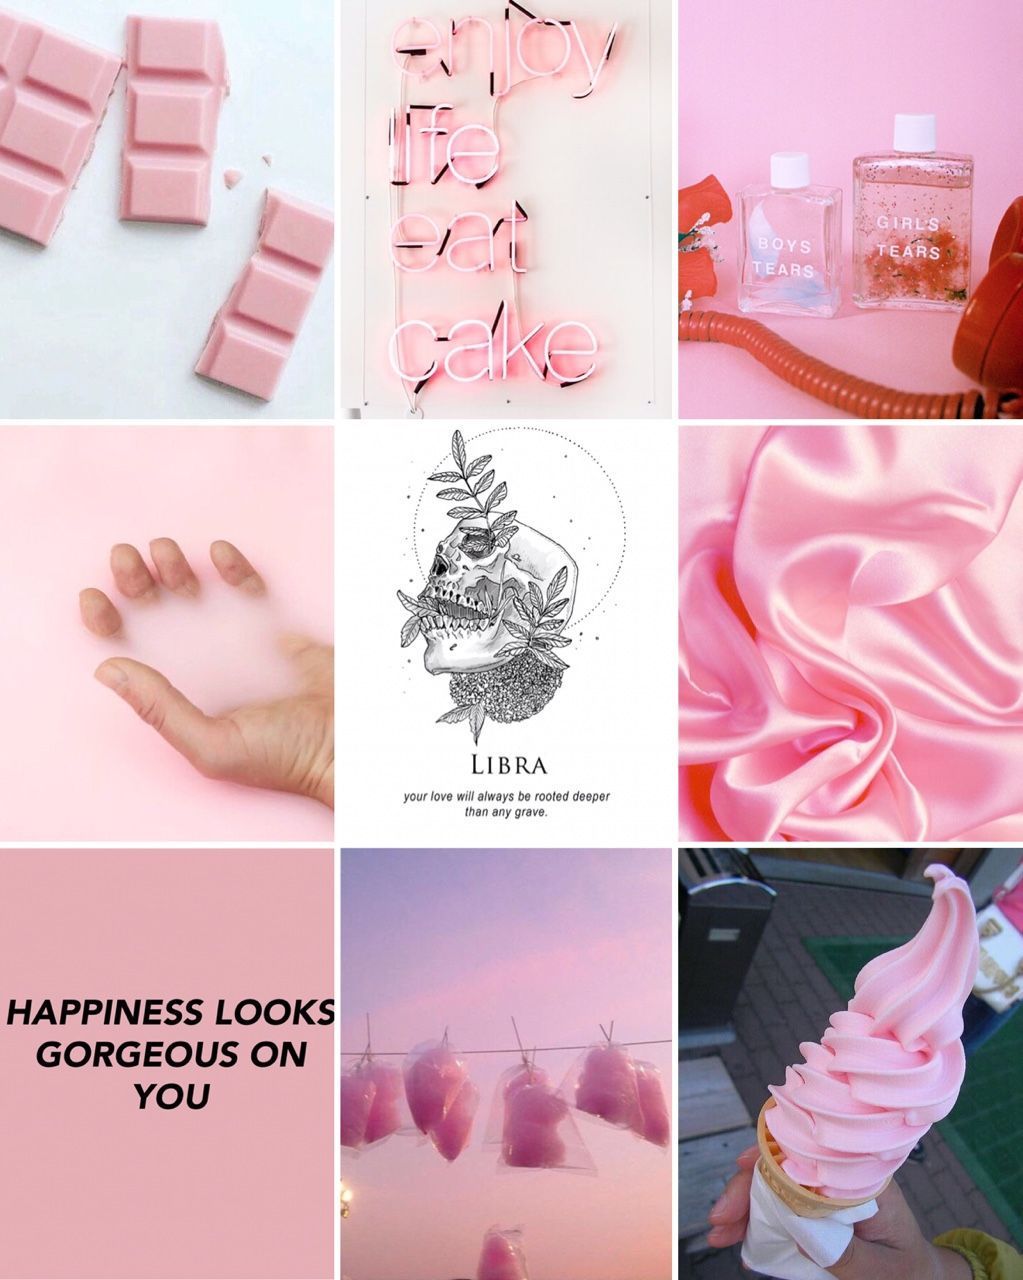 A collage of images in a pink aesthetic including ice cream, a hand, and neon signs. - Libra